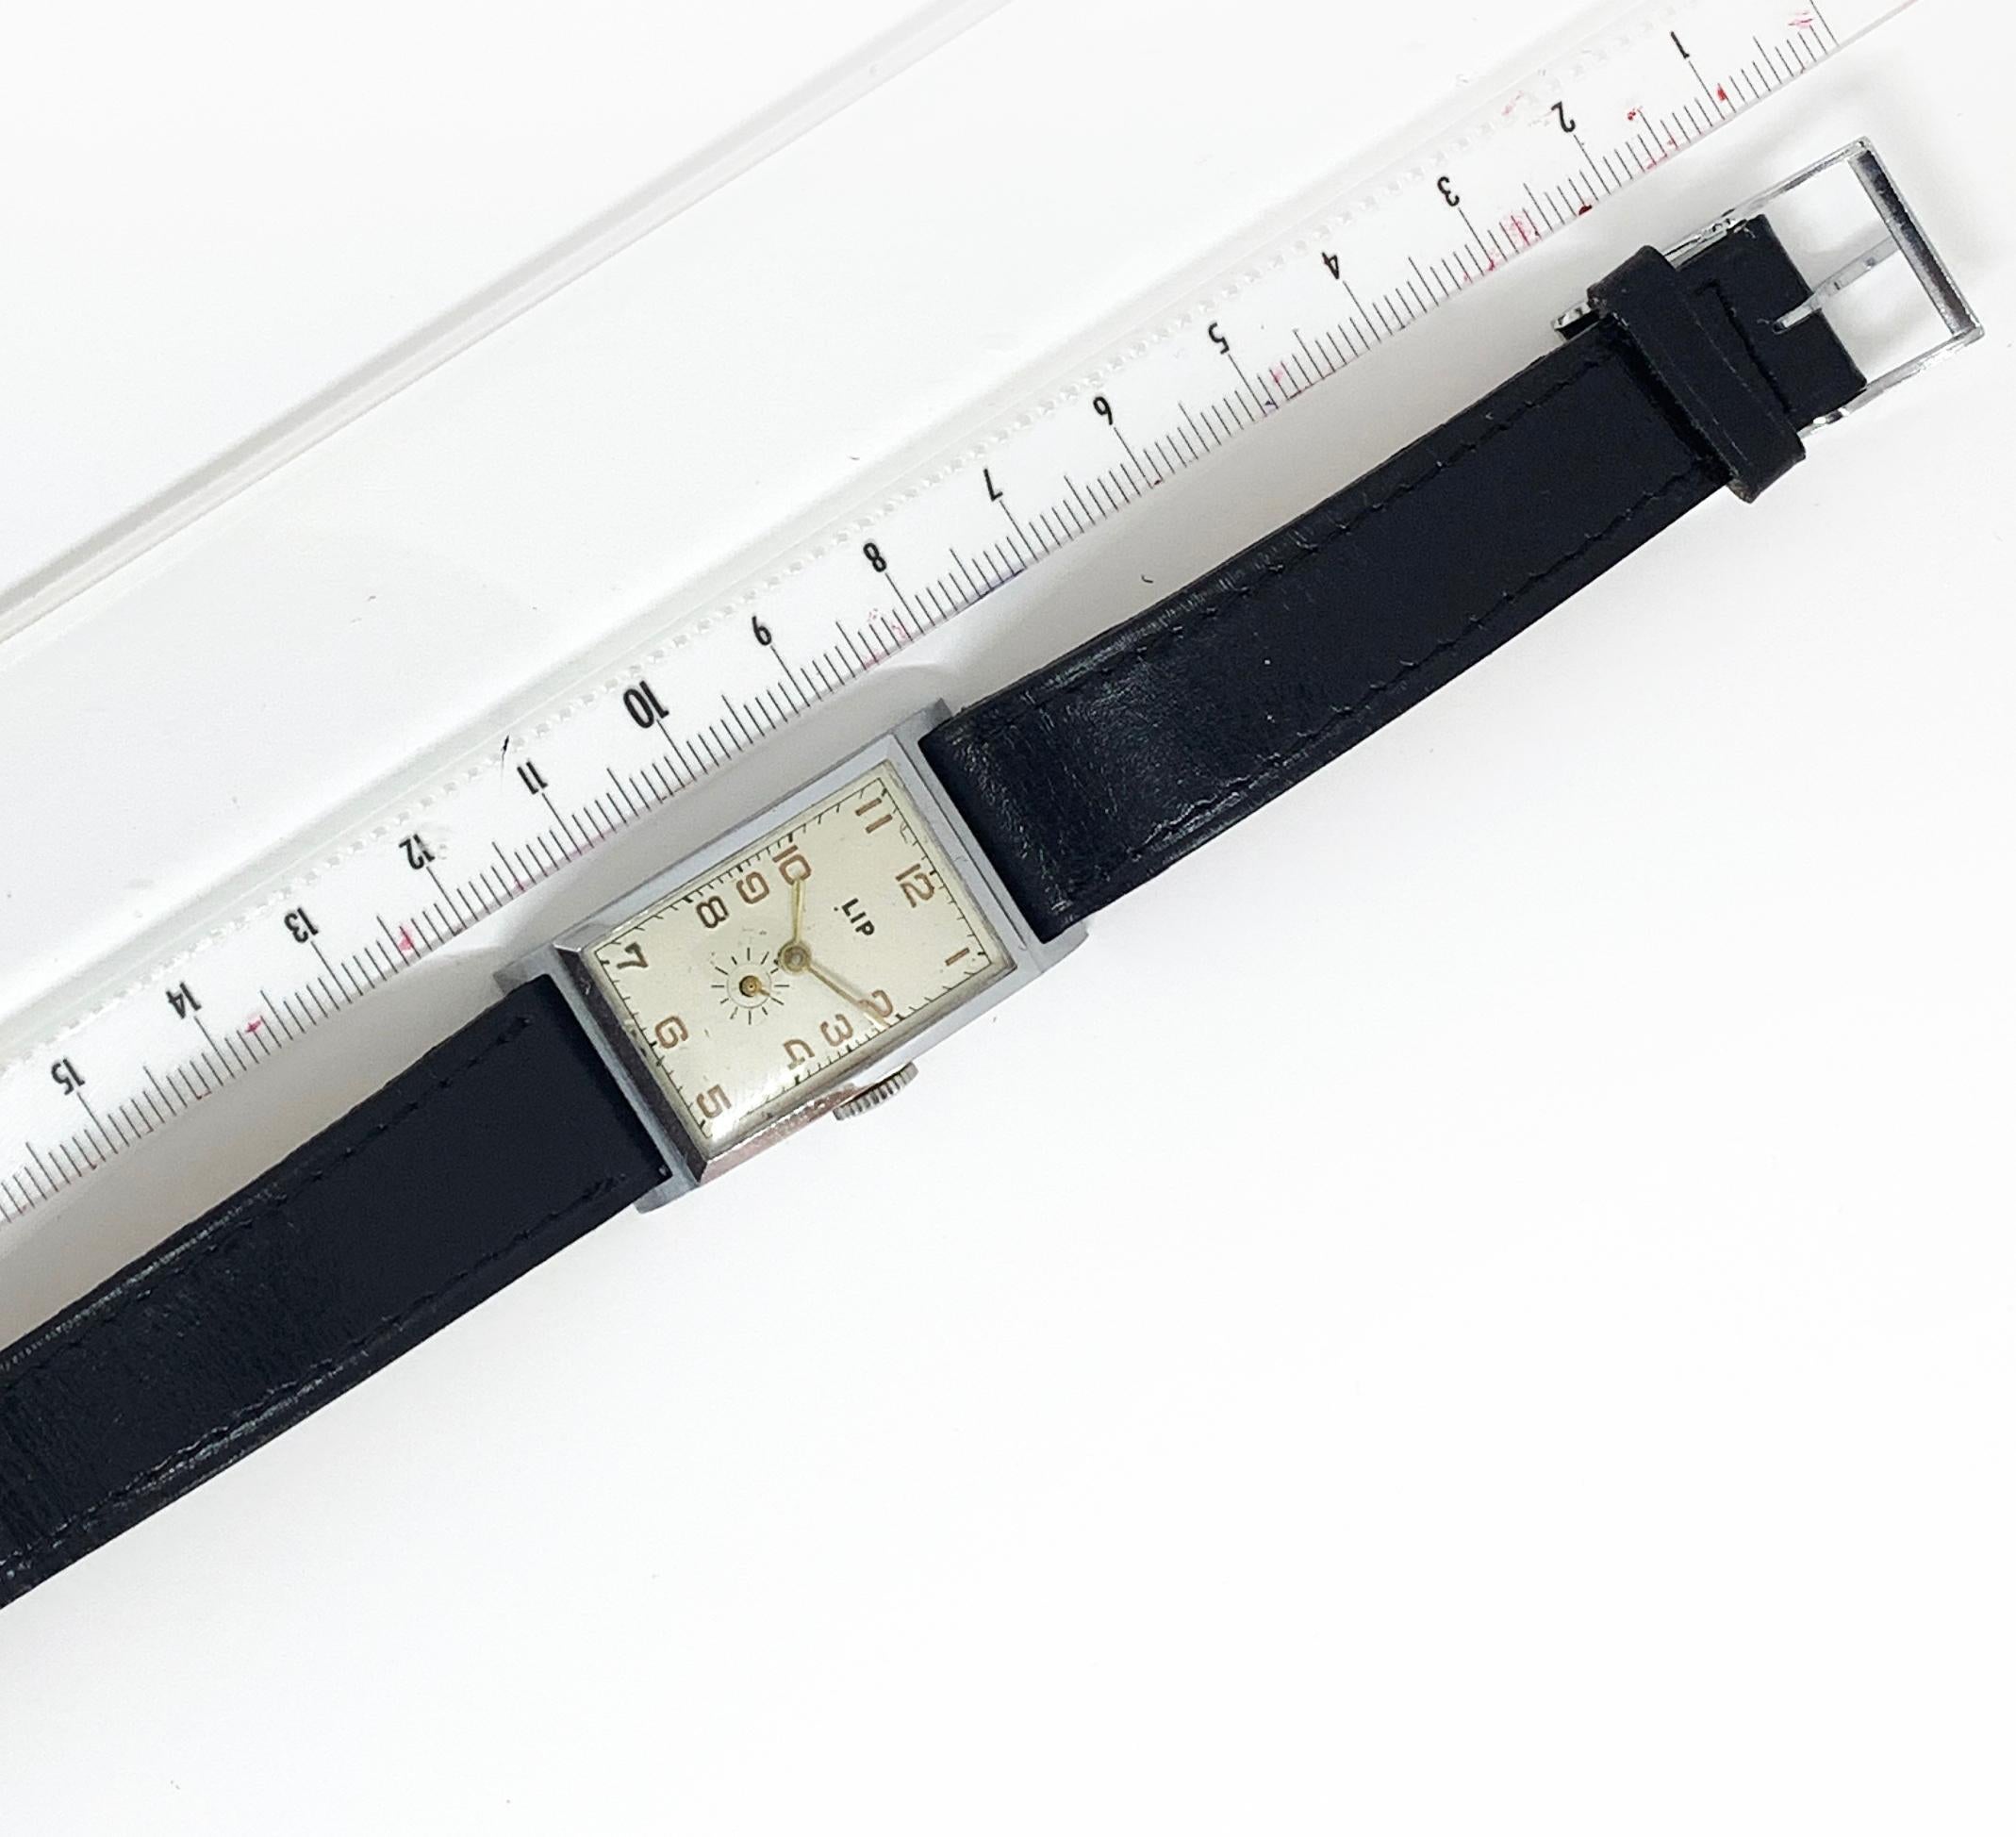 LIP T18 CIRCA 1960

Chrome-plated case with steel bottom
Hand-wound mechanical movement
Size: 21 x 39 mm
Leather bracelet
With case
excellent condition